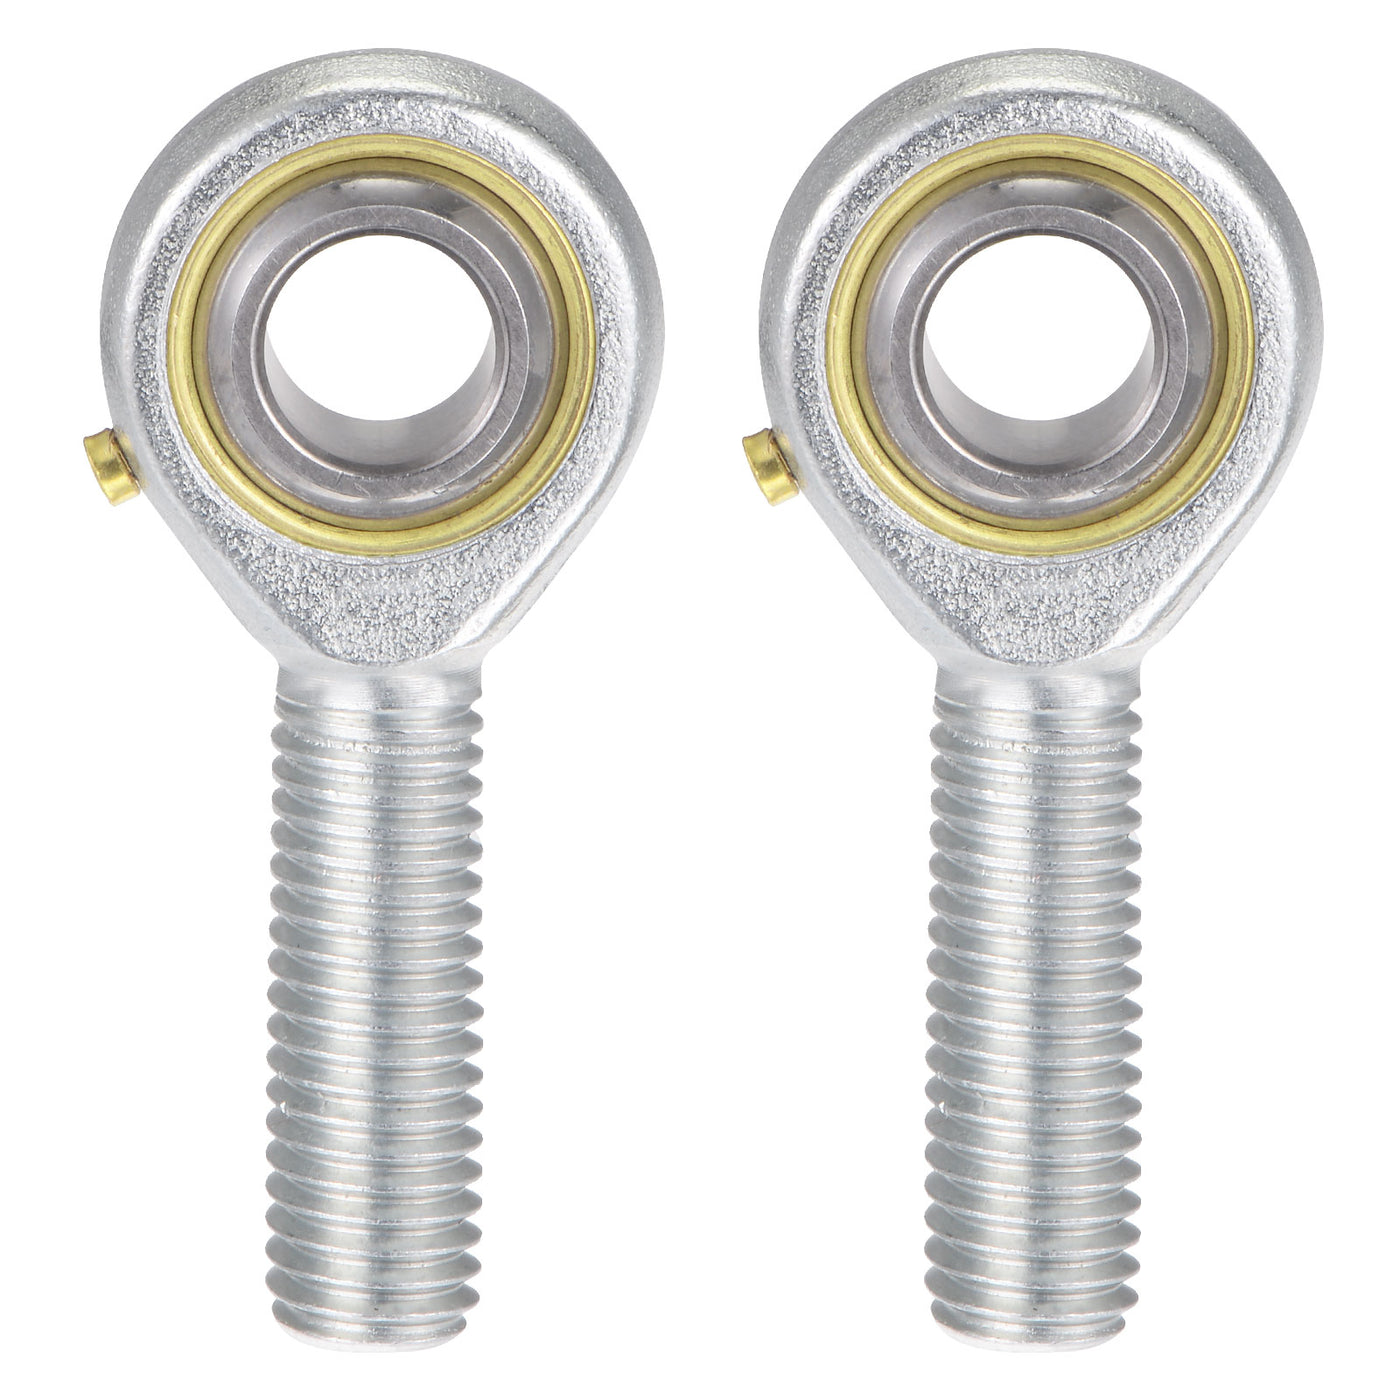 uxcell Uxcell Rod End Bearing Self-lubricated Joint Bearings Left Hand Male Thread Connector